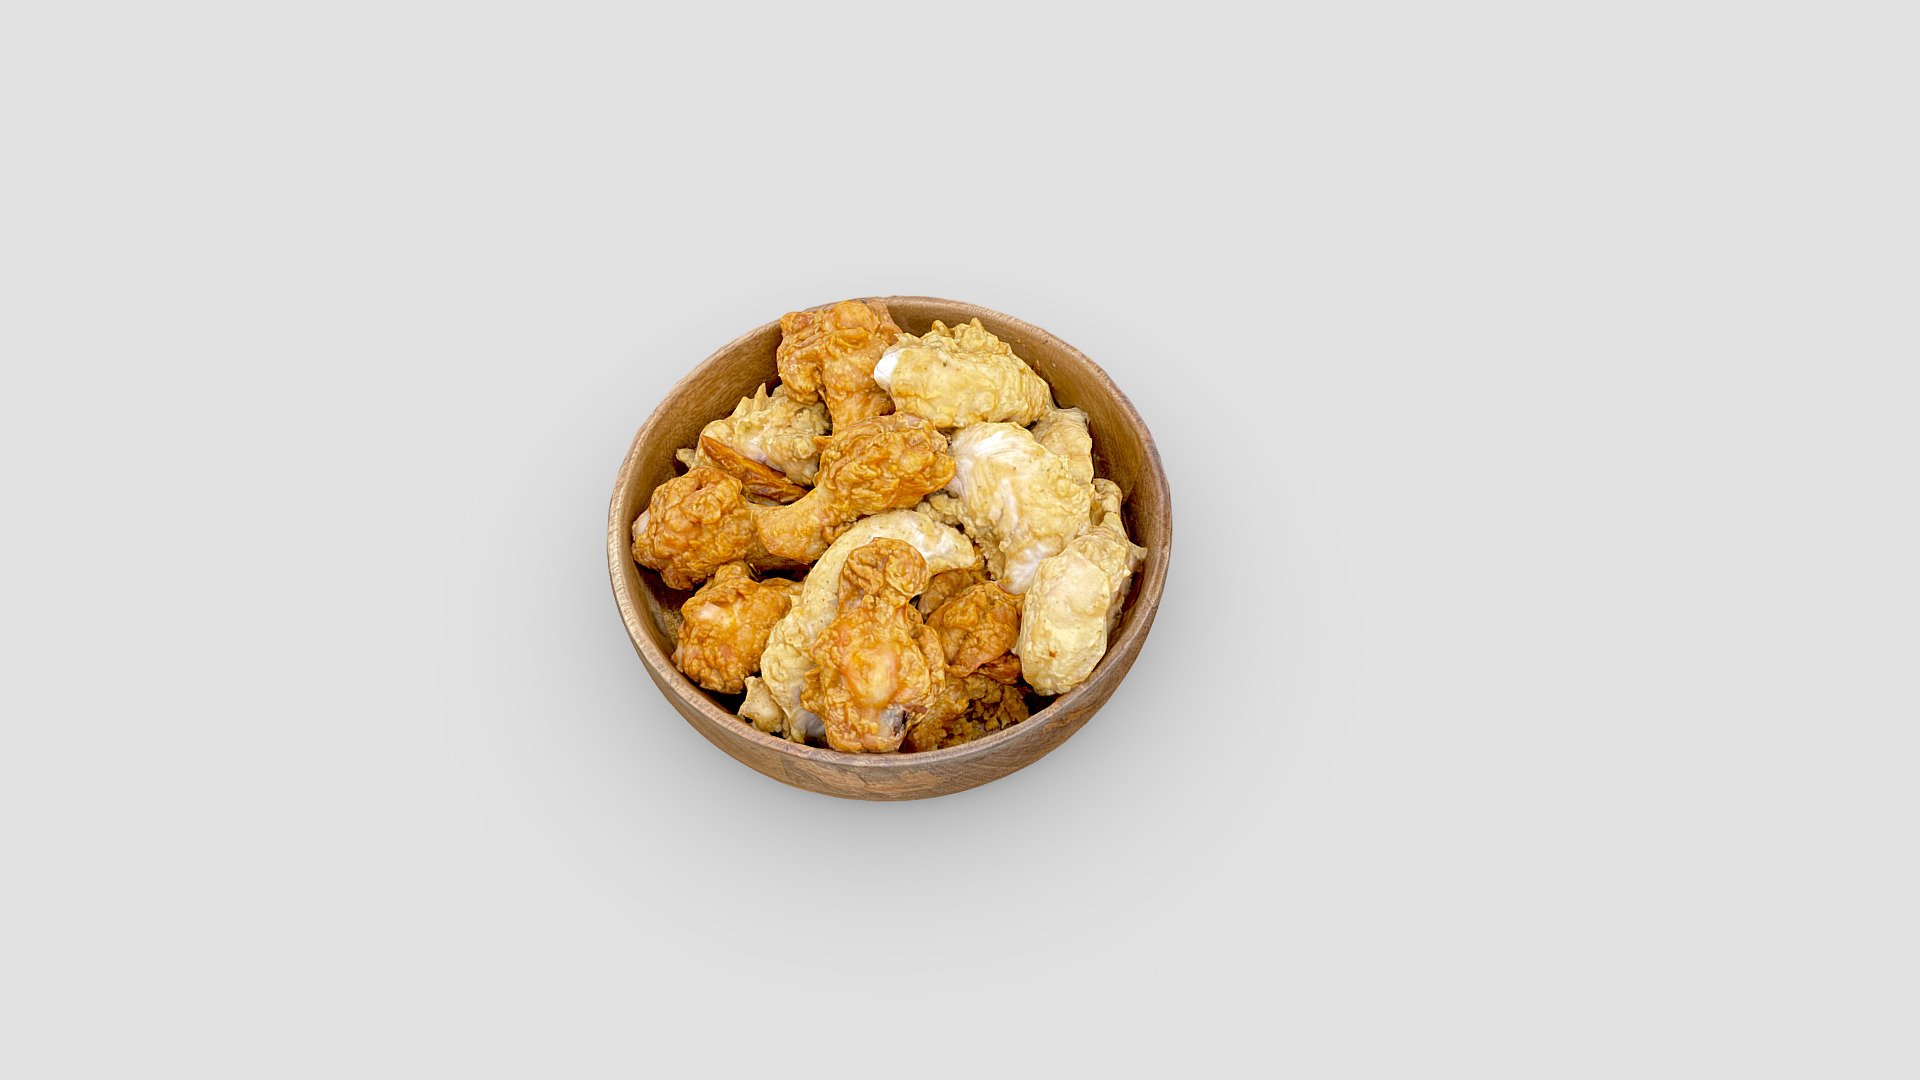 Fried Chicken wings and strips.

more info:




View my Metaverse/AR/VR recipes on. Zoltanfood

Support me on. Patreon

Find me on. Opensea

file types:




2k poly in 2k texture

50k poly in 2k texture

50k poly in 4k texture
 - Fried chicken bowl - Buy Royalty Free 3D model by Zoltanfood 3d model